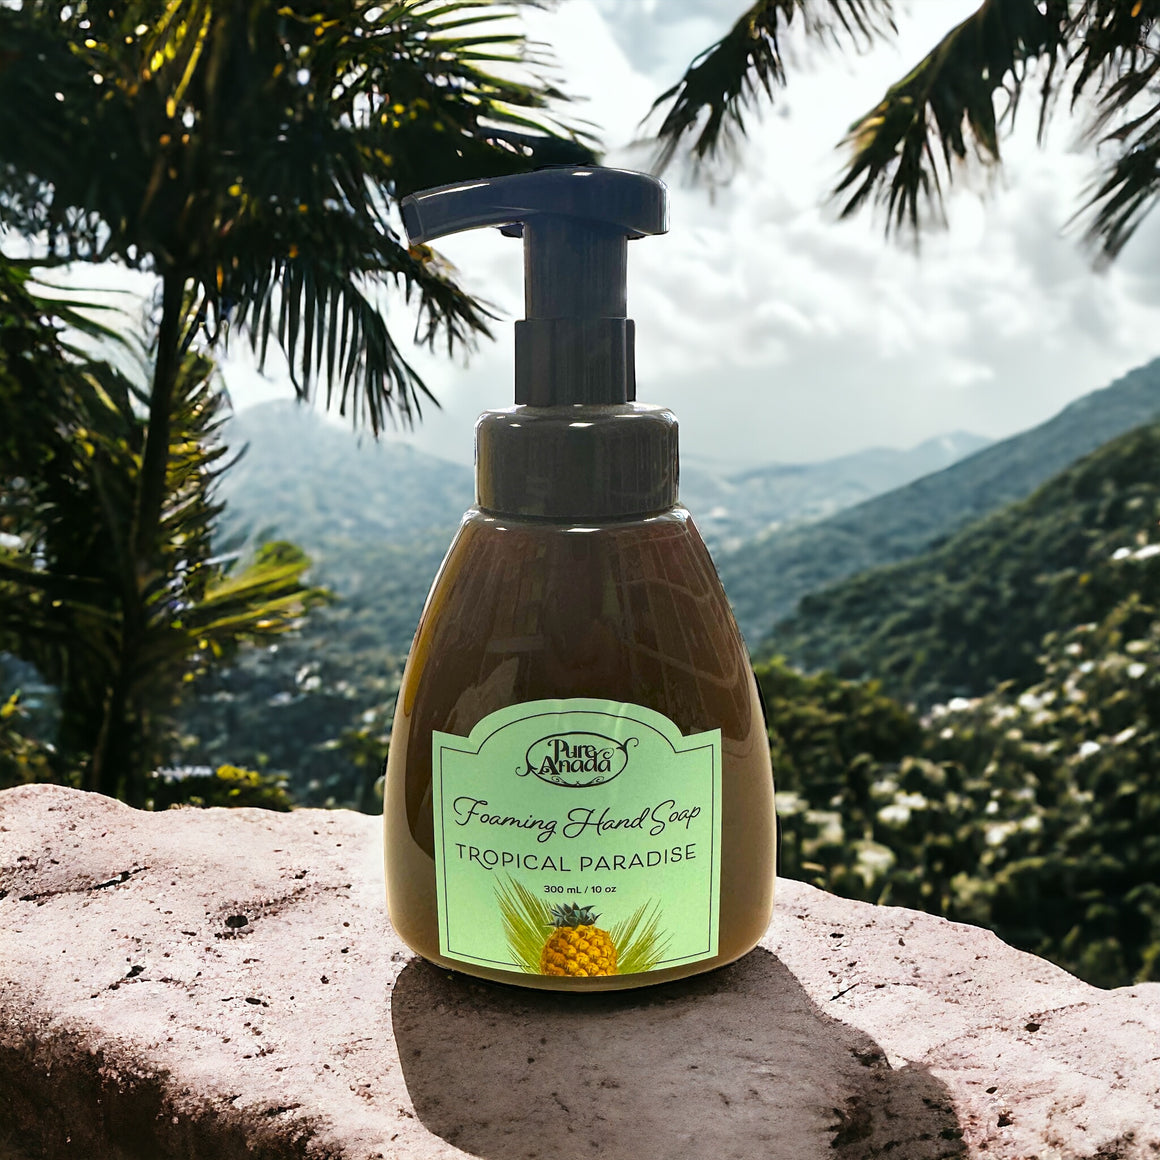 Tropical Paradise (was Coconut) Natural Foaming Hand Soap - Pure Anada 300ml